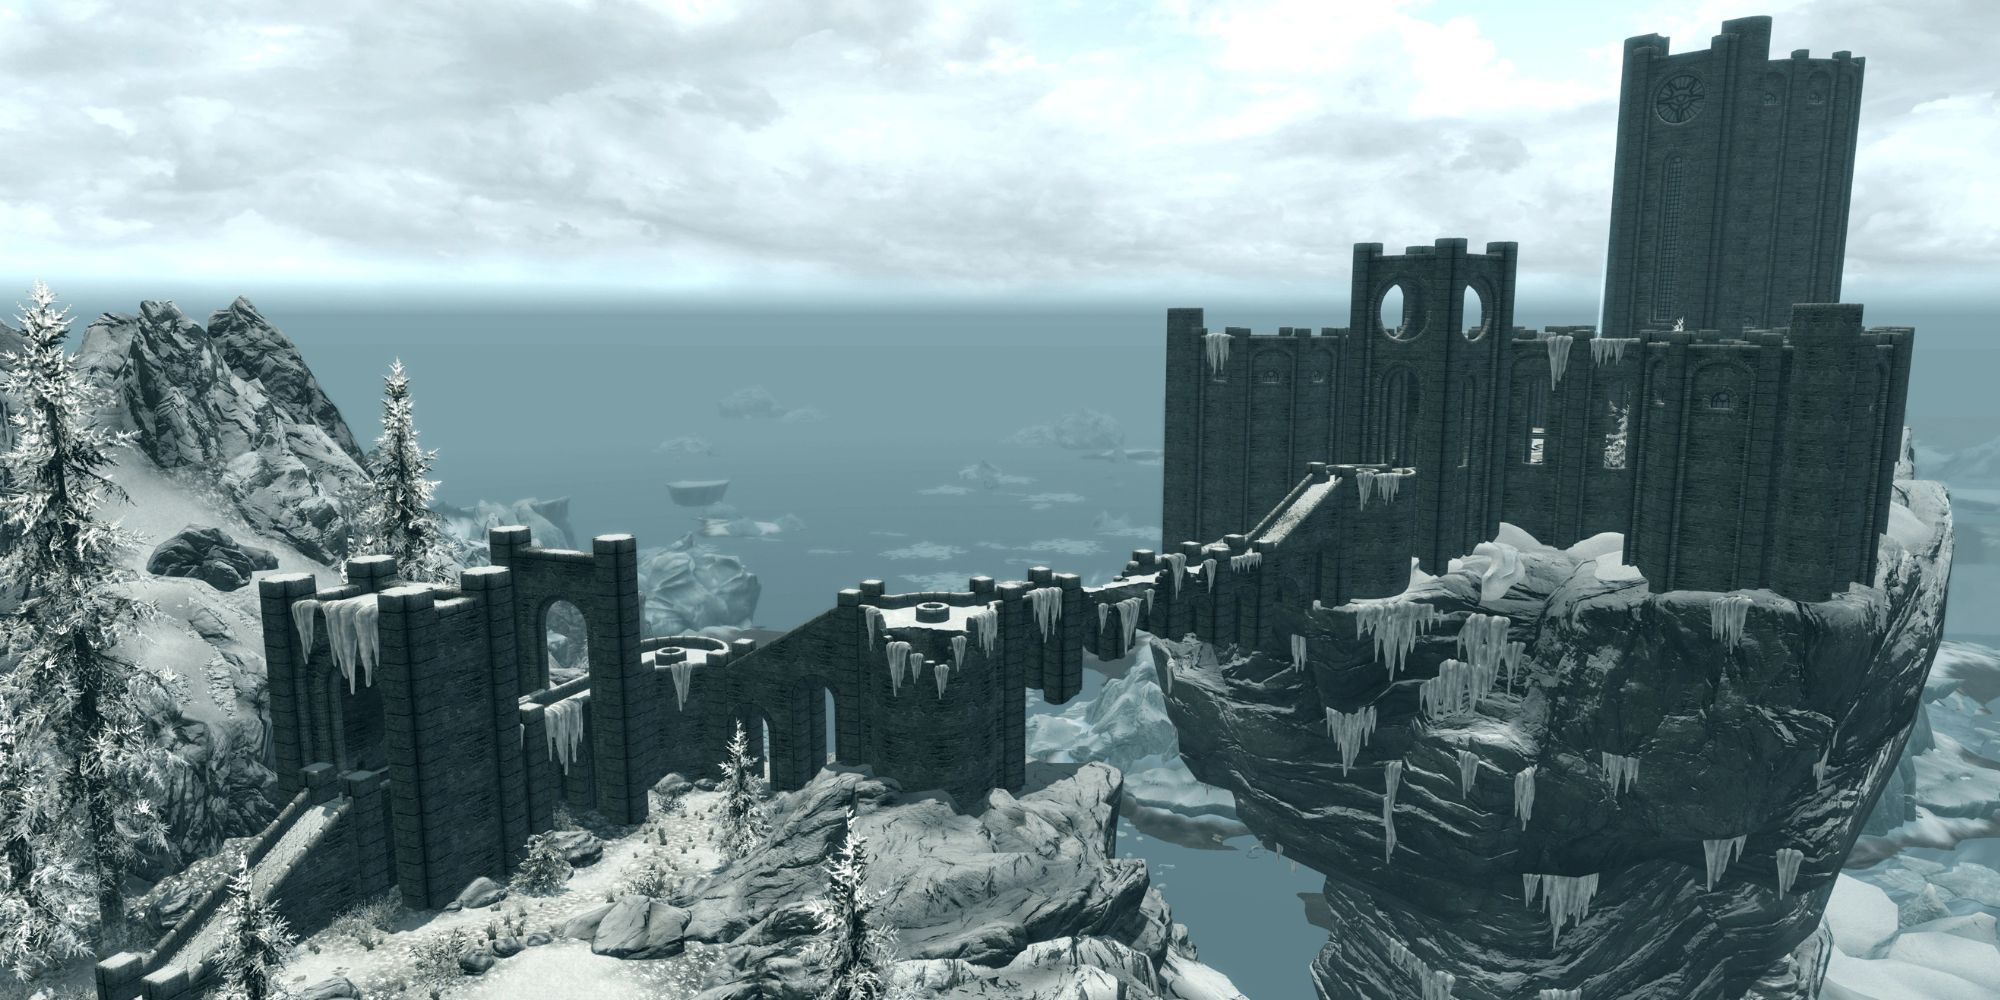 The college of Winterhold from Skyrim